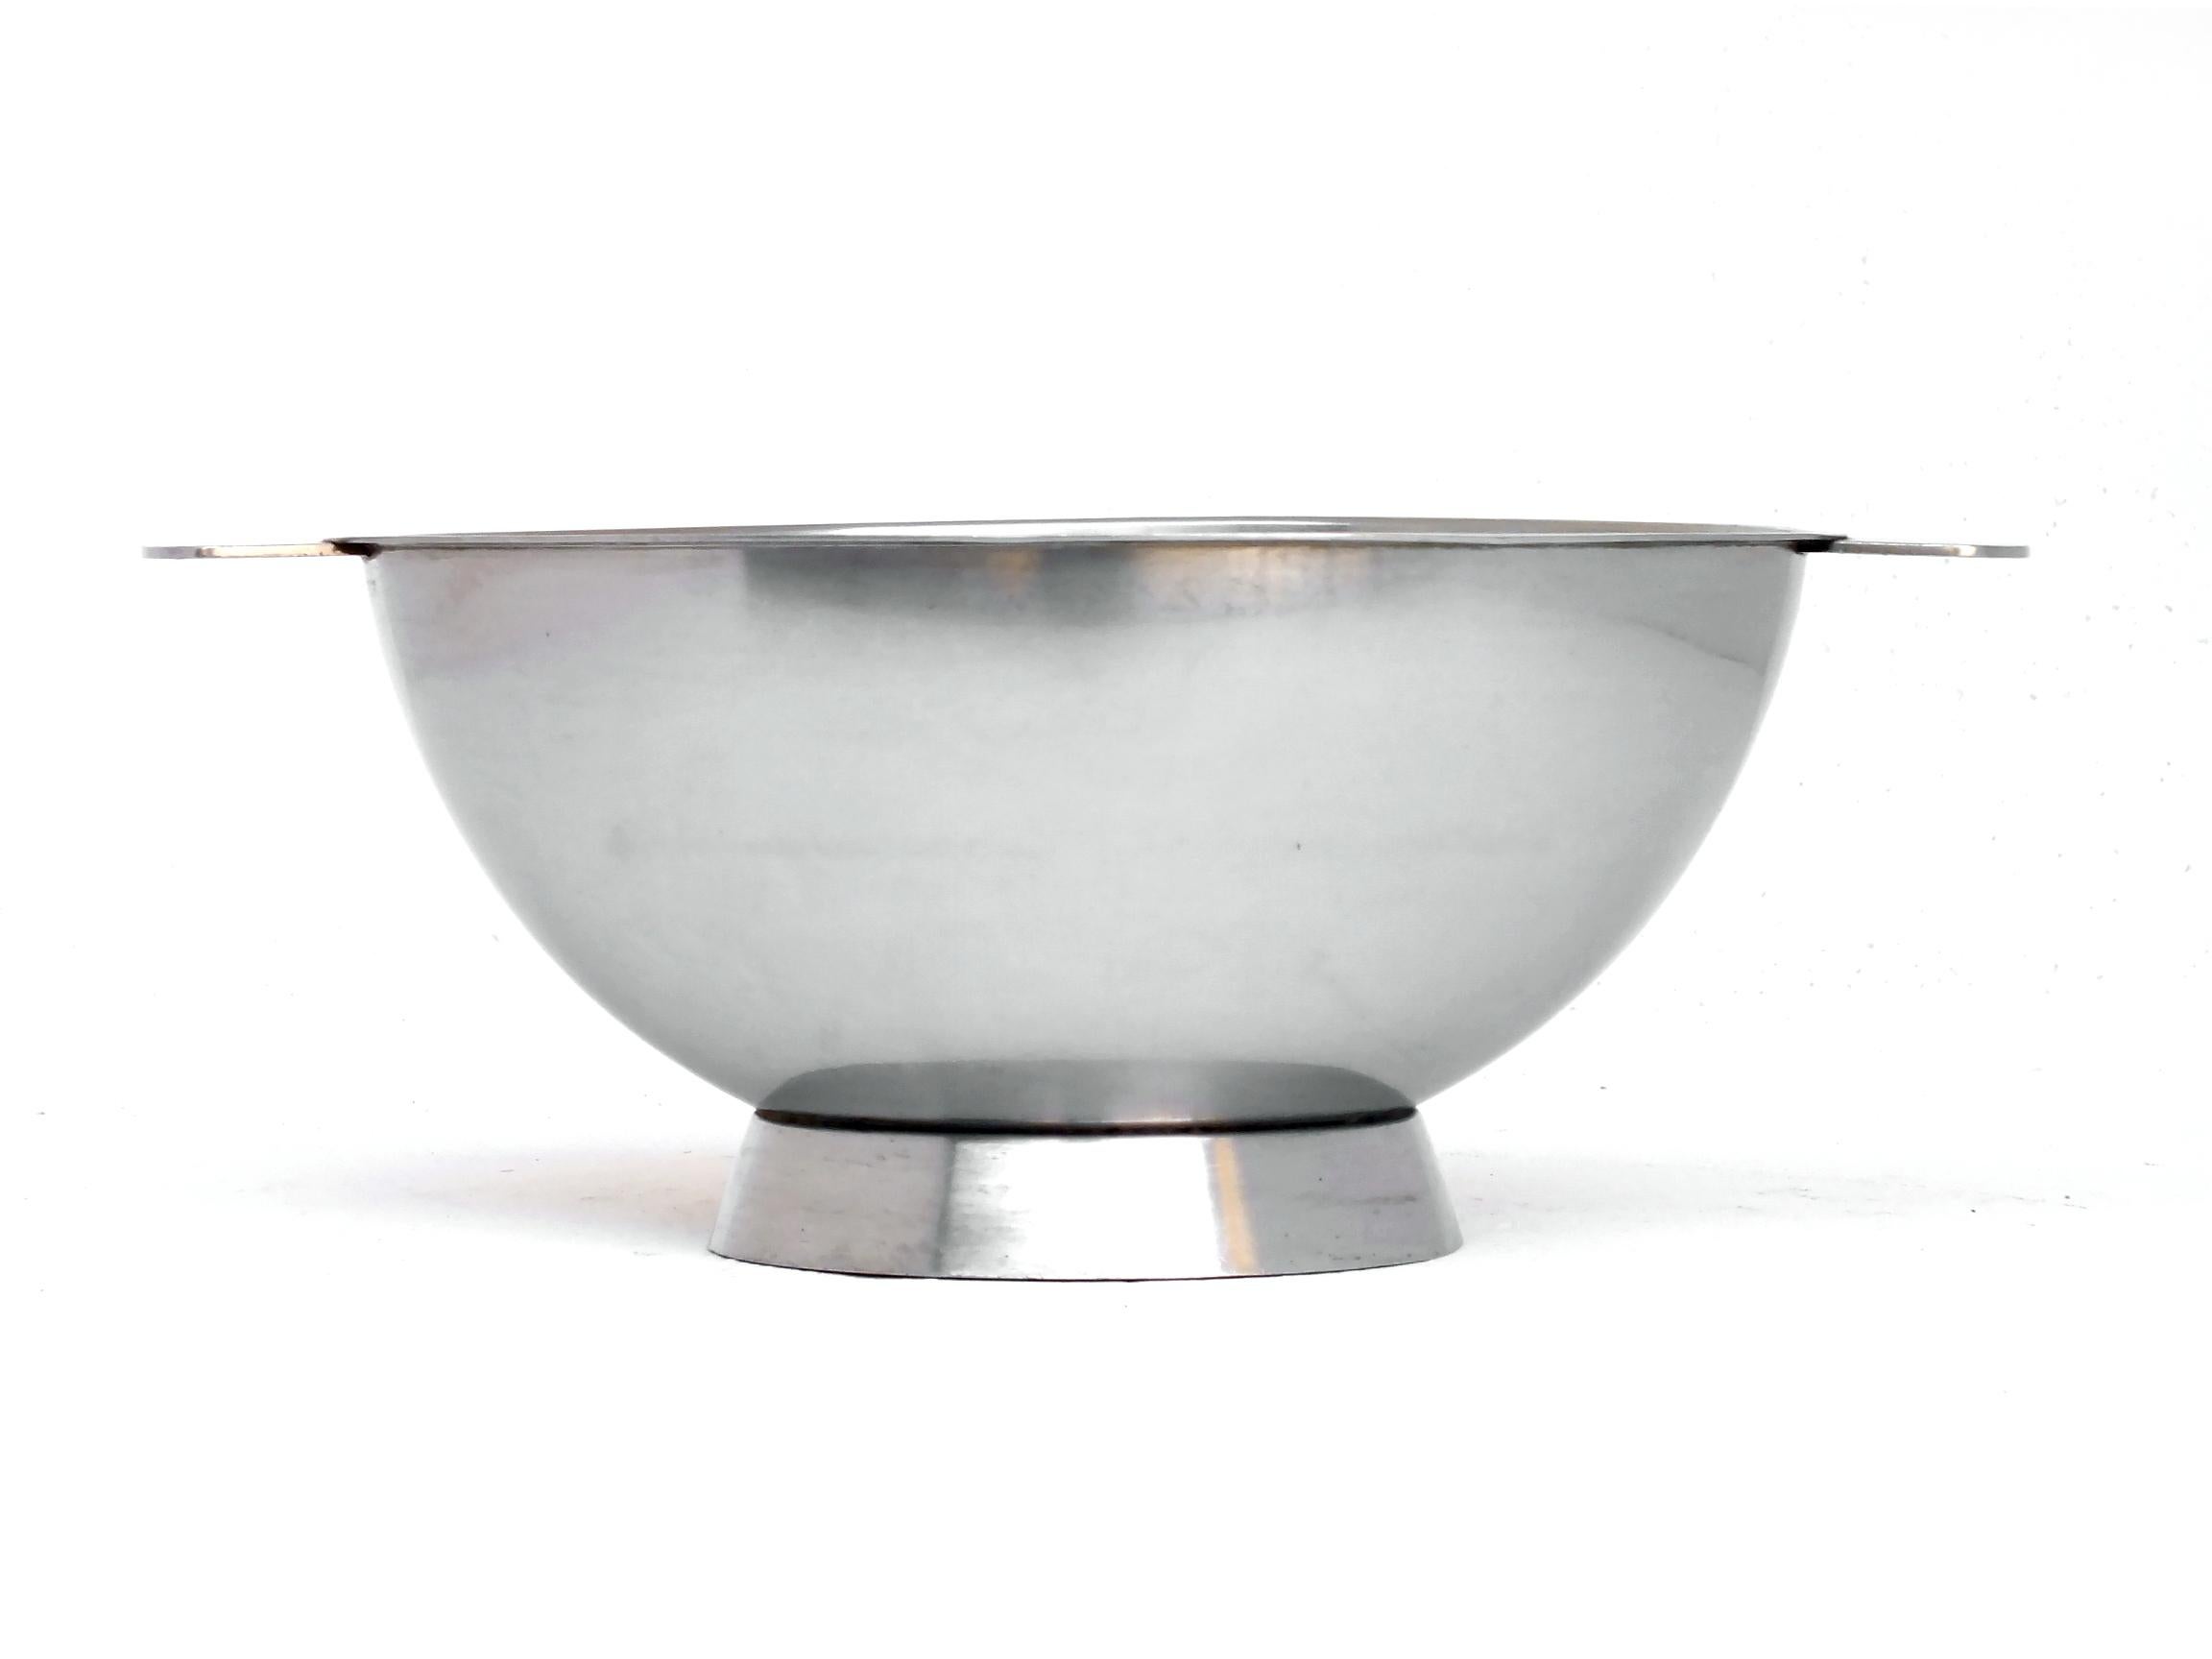 Gio' Ponti design bowl for Arthur Krupp Milano years 1930 rare typology

 the bowl, is in good vintage condition

 Measure; diameter 15 inches with handles and 6